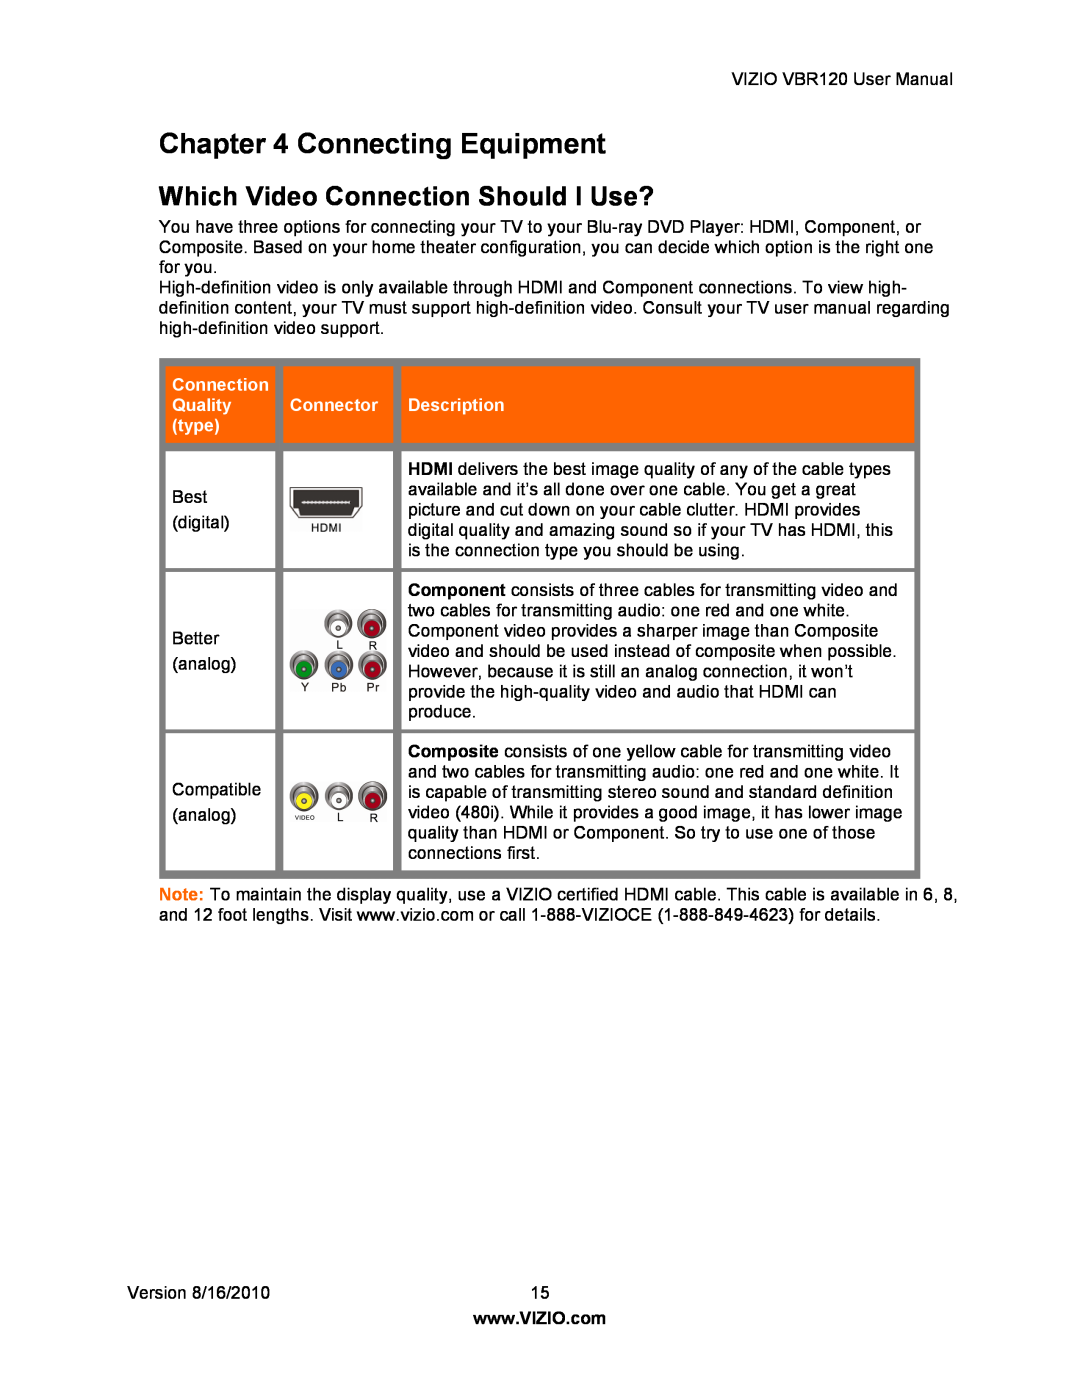 Vizio VBR 120 user manual Connecting Equipment, Which Video Connection Should I Use?, Quality, Connector, Description, type 